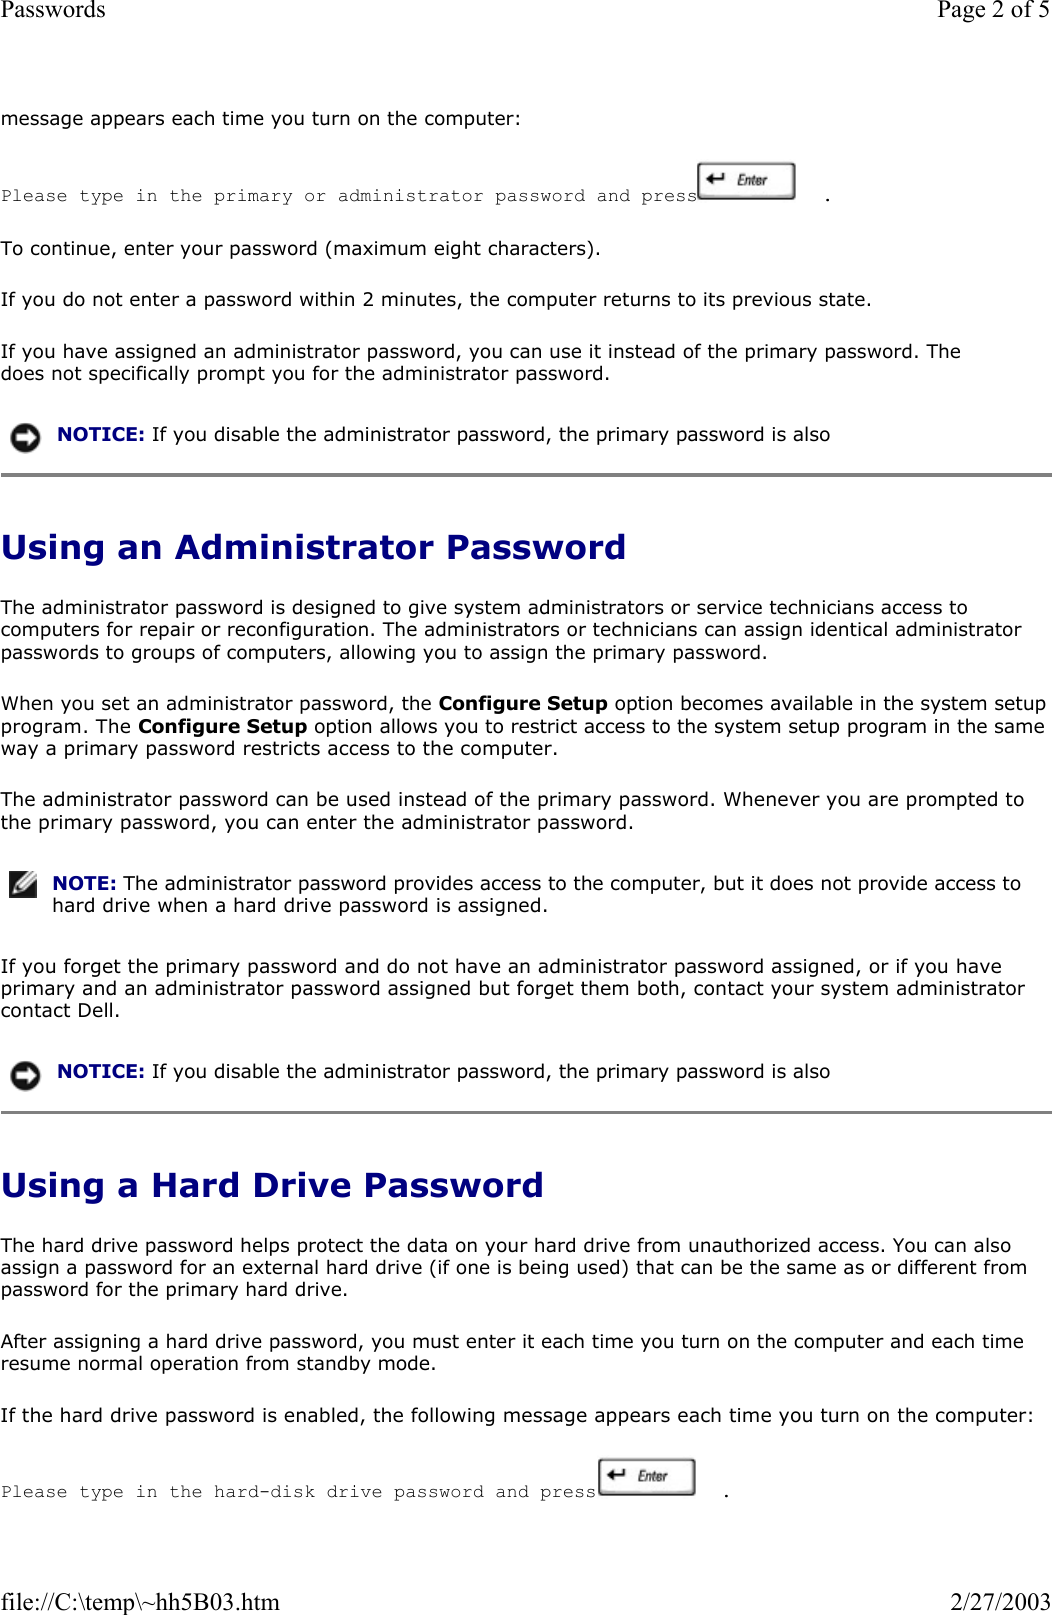 message appears each time you turn on the computer: Please type in the primary or administrator password and press   .  To continue, enter your password (maximum eight characters). If you do not enter a password within 2 minutes, the computer returns to its previous state. If you have assigned an administrator password, you can use it instead of the primary password. The does not specifically prompt you for the administrator password. Using an Administrator Password The administrator password is designed to give system administrators or service technicians access to computers for repair or reconfiguration. The administrators or technicians can assign identical administrator passwords to groups of computers, allowing you to assign the primary password. When you set an administrator password, the Configure Setup option becomes available in the system setup program. The Configure Setup option allows you to restrict access to the system setup program in the same way a primary password restricts access to the computer. The administrator password can be used instead of the primary password. Whenever you are prompted to the primary password, you can enter the administrator password. If you forget the primary password and do not have an administrator password assigned, or if you have primary and an administrator password assigned but forget them both, contact your system administrator contact Dell. Using a Hard Drive Password The hard drive password helps protect the data on your hard drive from unauthorized access. You can also assign a password for an external hard drive (if one is being used) that can be the same as or different from password for the primary hard drive. After assigning a hard drive password, you must enter it each time you turn on the computer and each time resume normal operation from standby mode. If the hard drive password is enabled, the following message appears each time you turn on the computer: Please type in the hard-disk drive password and press   .  NOTICE: If you disable the administrator password, the primary password is also NOTE: The administrator password provides access to the computer, but it does not provide access to hard drive when a hard drive password is assigned. NOTICE: If you disable the administrator password, the primary password is also Page 2 of 5Passwords2/27/2003file://C:\temp\~hh5B03.htm